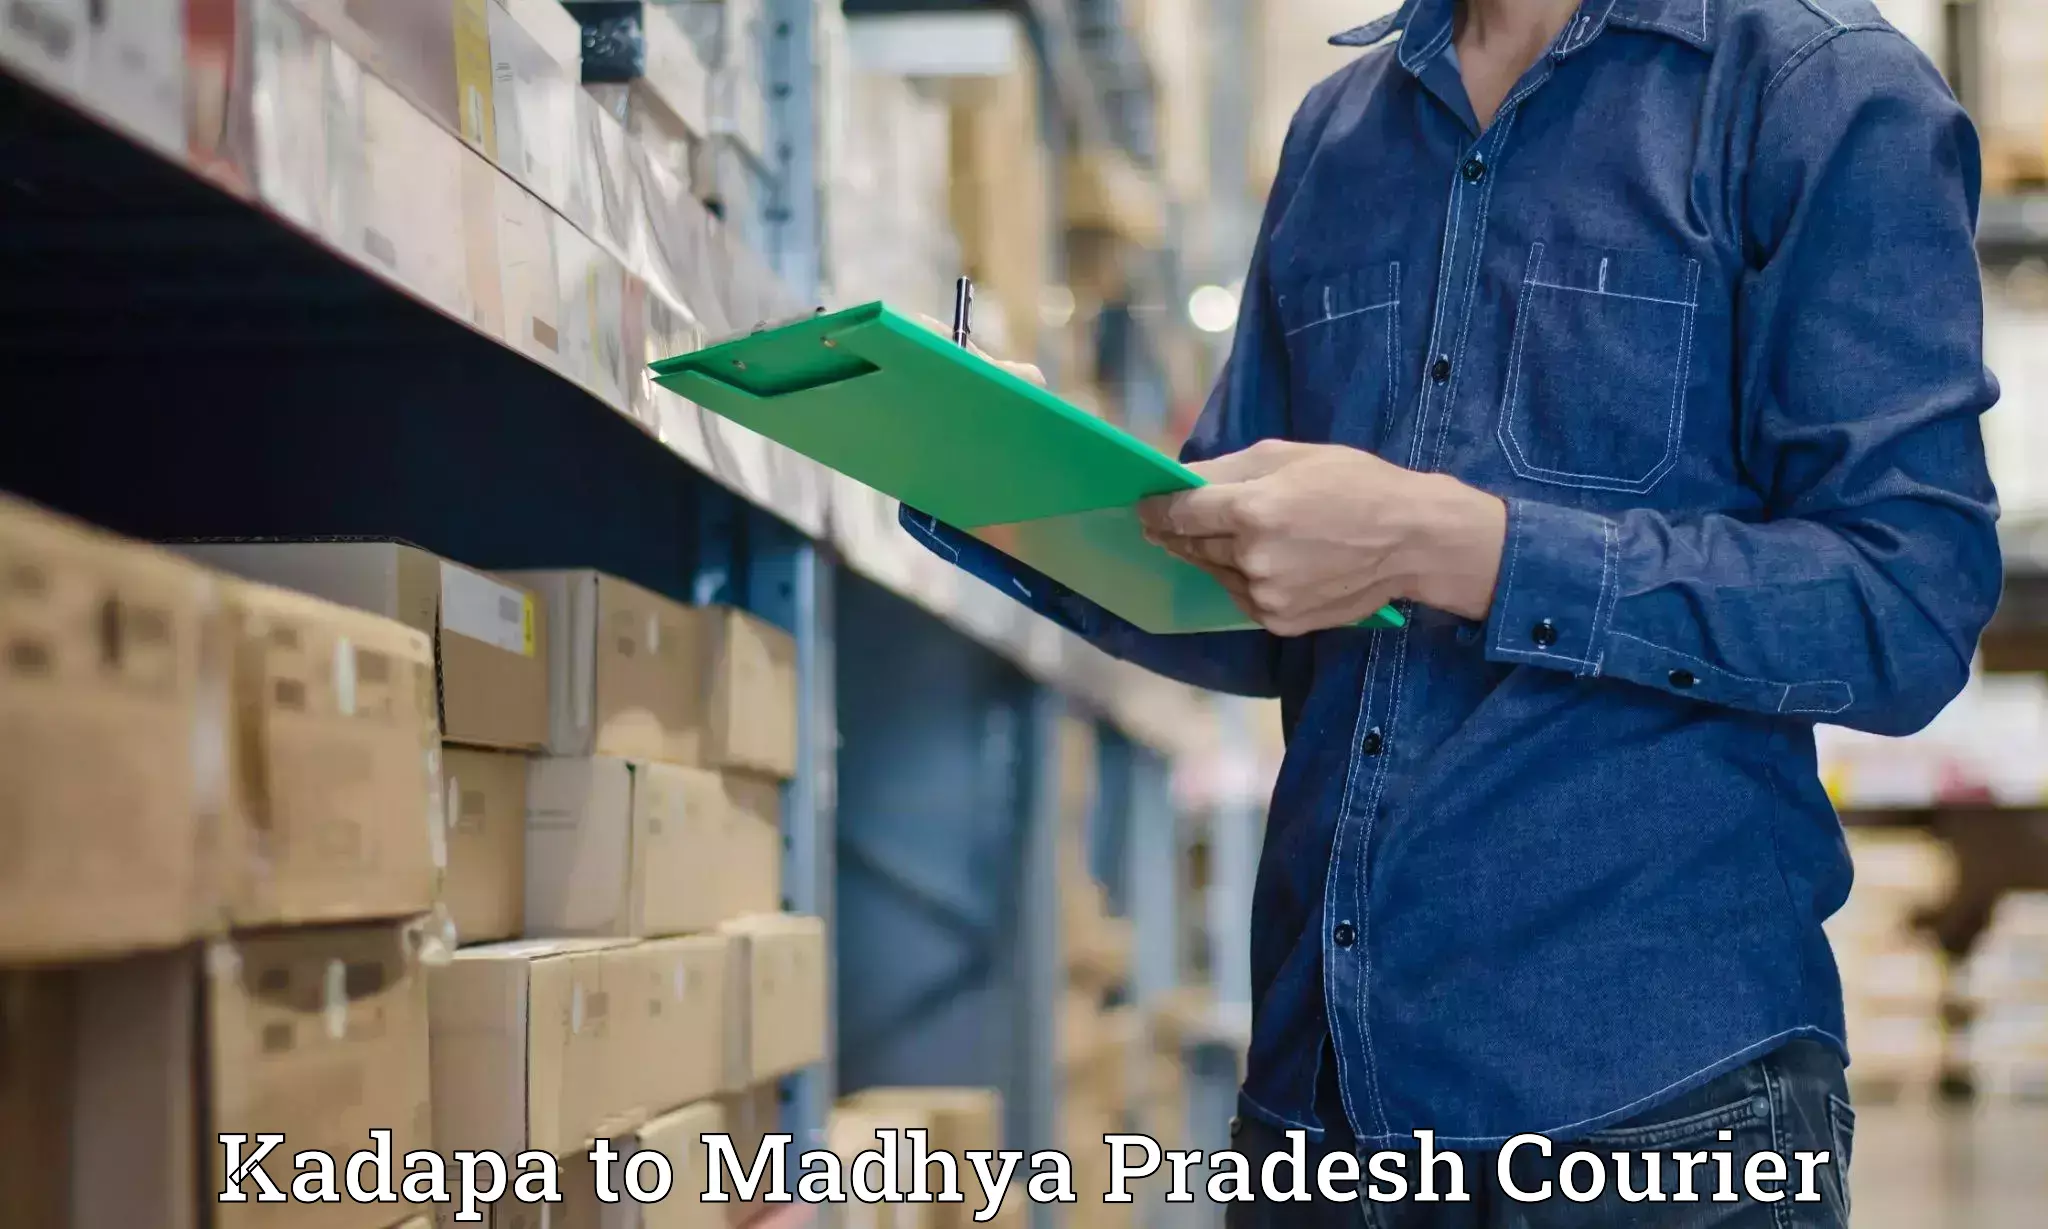 State-of-the-art courier technology Kadapa to Athner